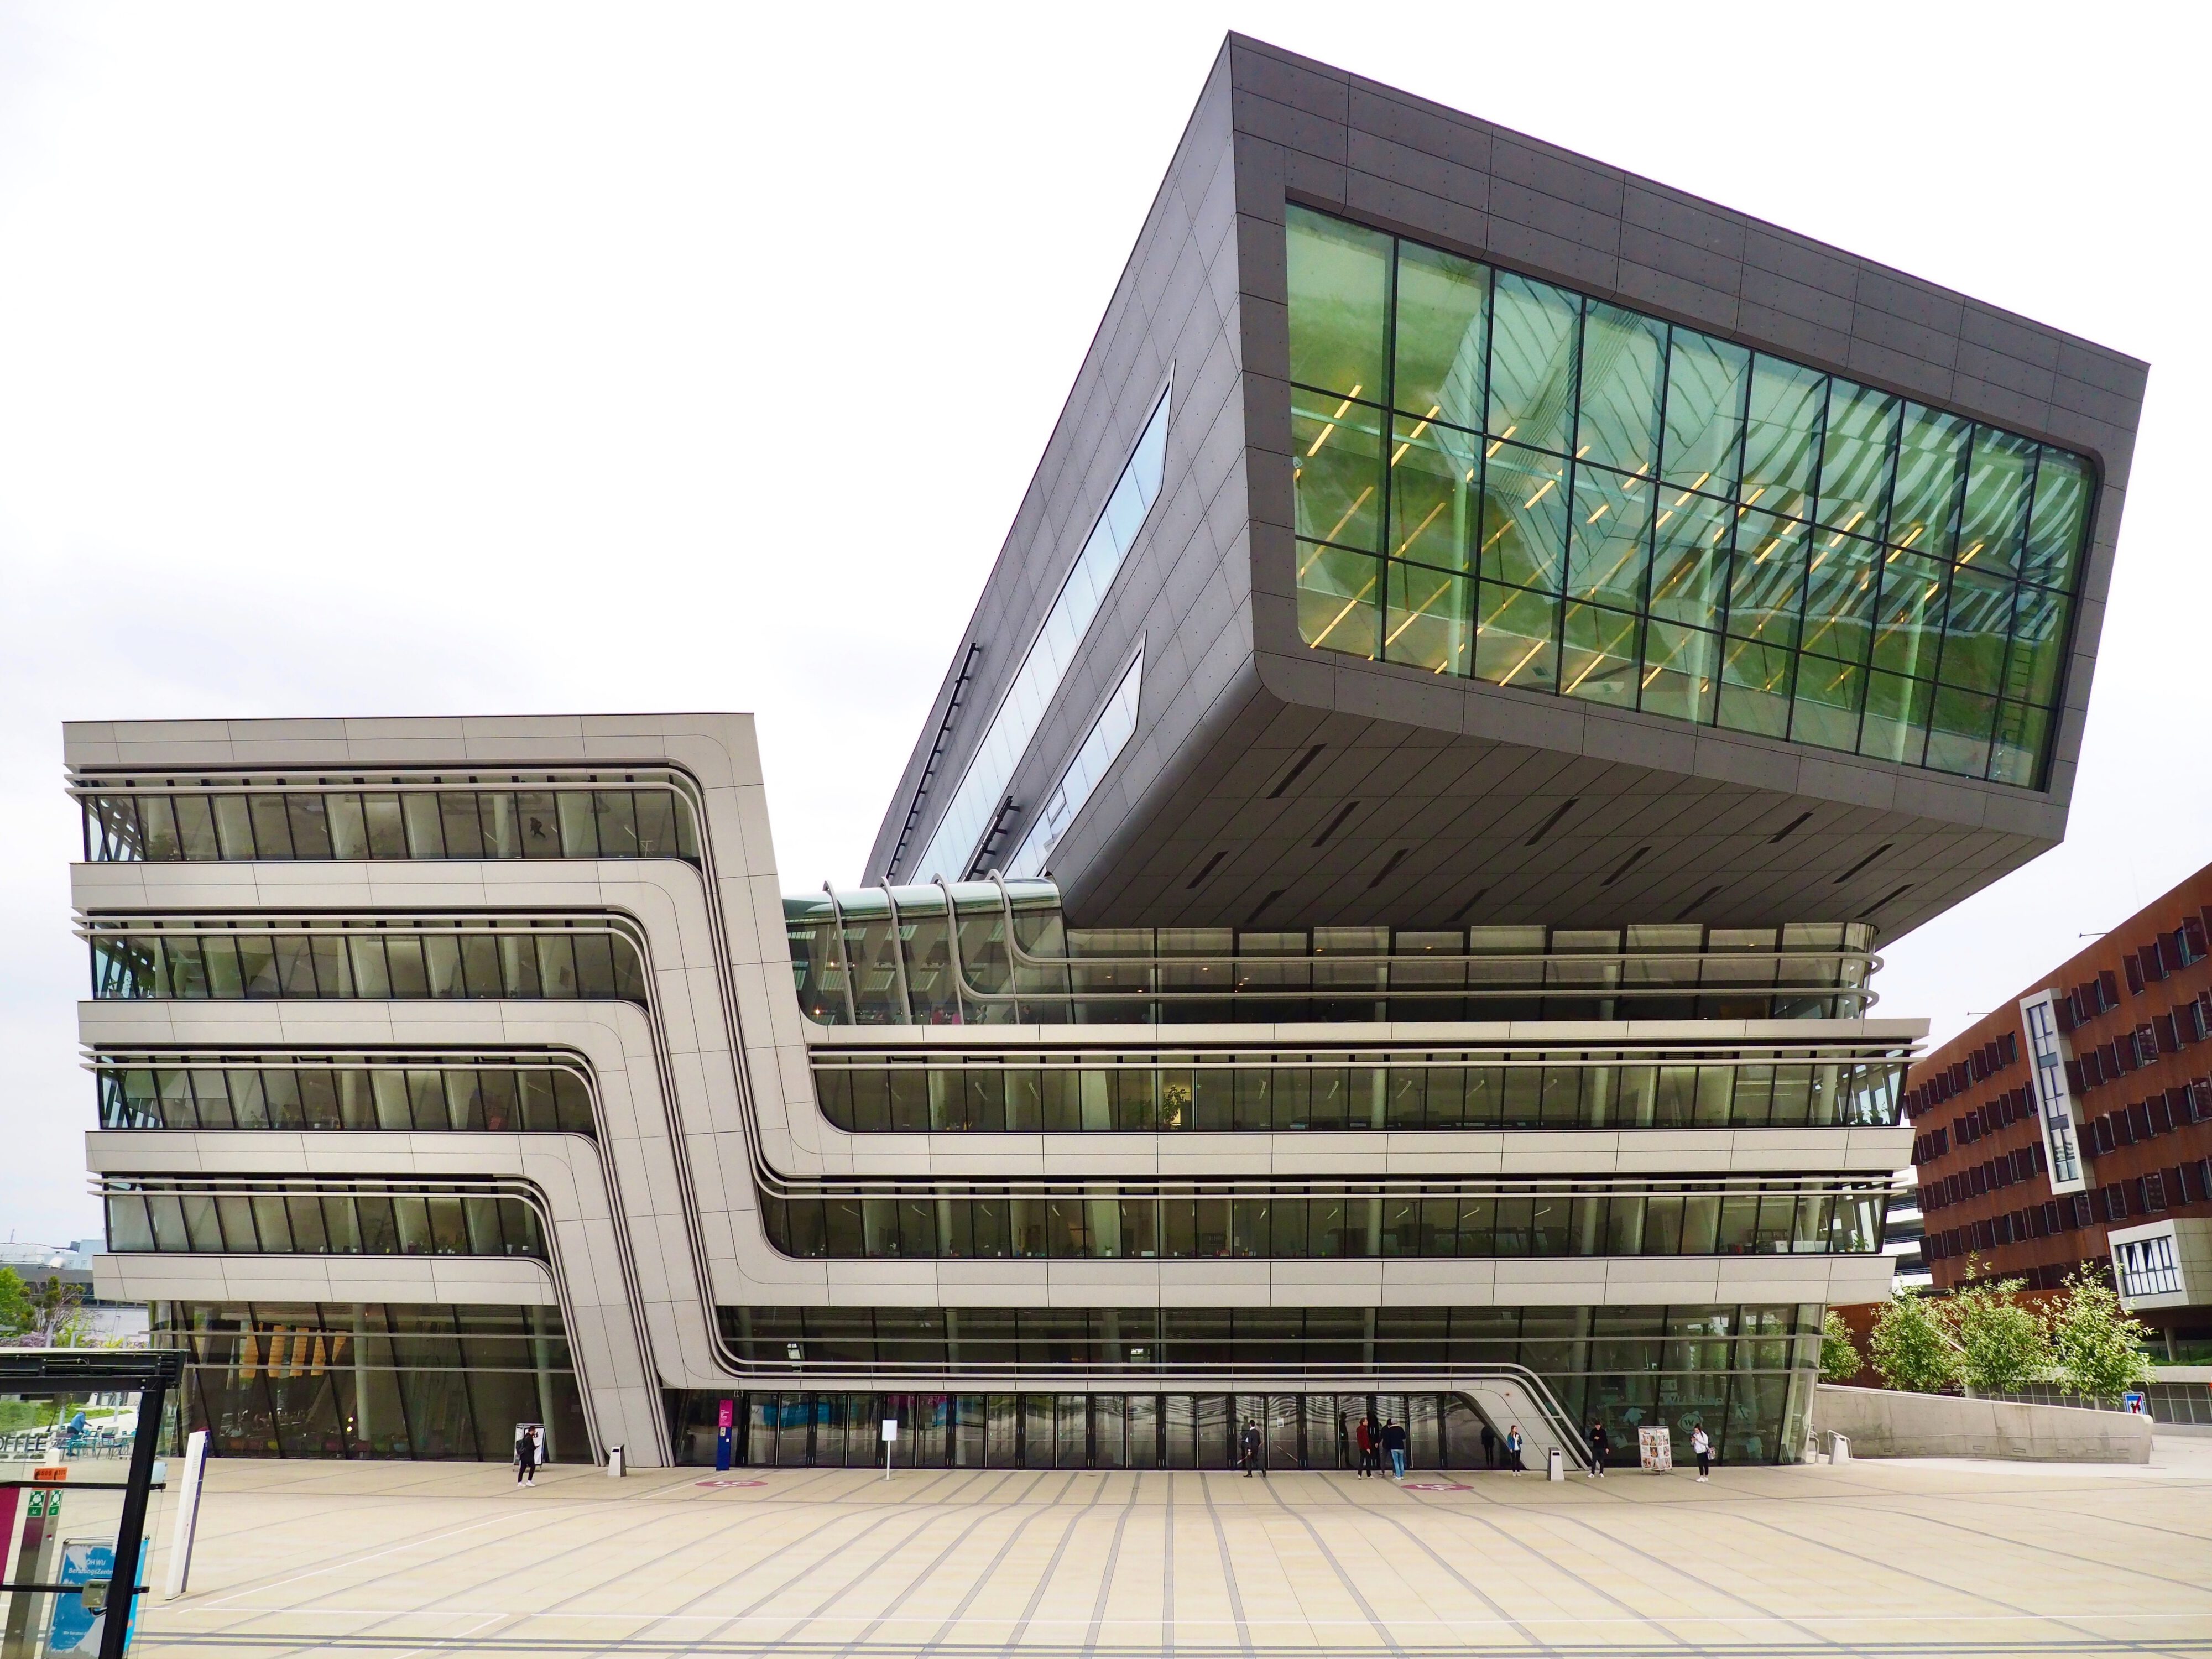 The Library and Learning Centre of the University of Economics Vienna was planned by Zaha Hadid and opened in 2013